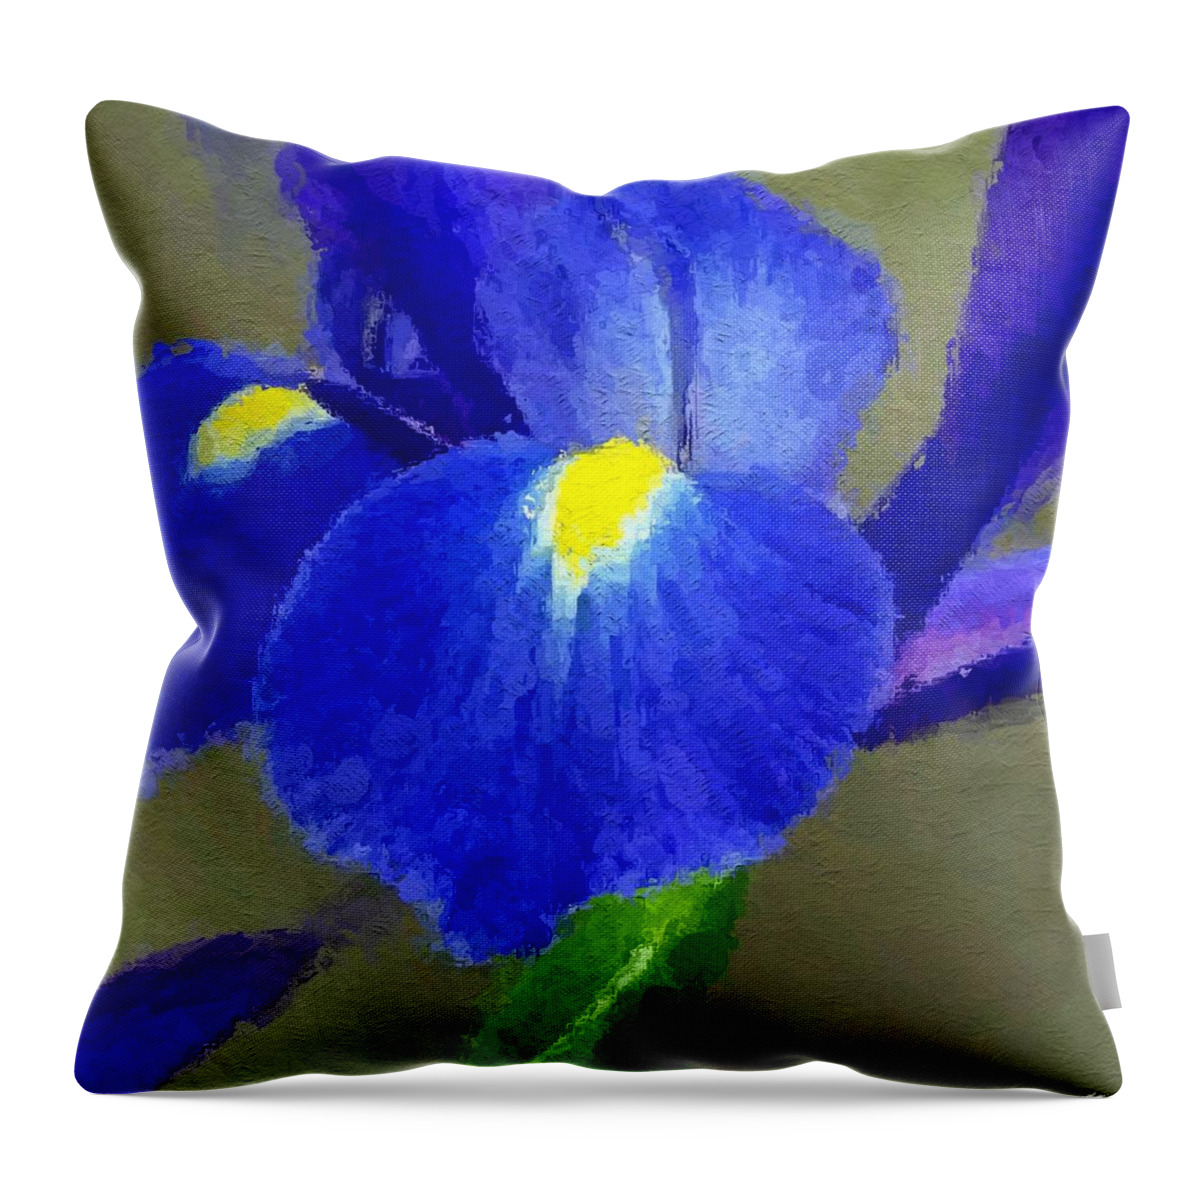 Anthony Fishburne Throw Pillow featuring the digital art Bearded Iris by Anthony Fishburne